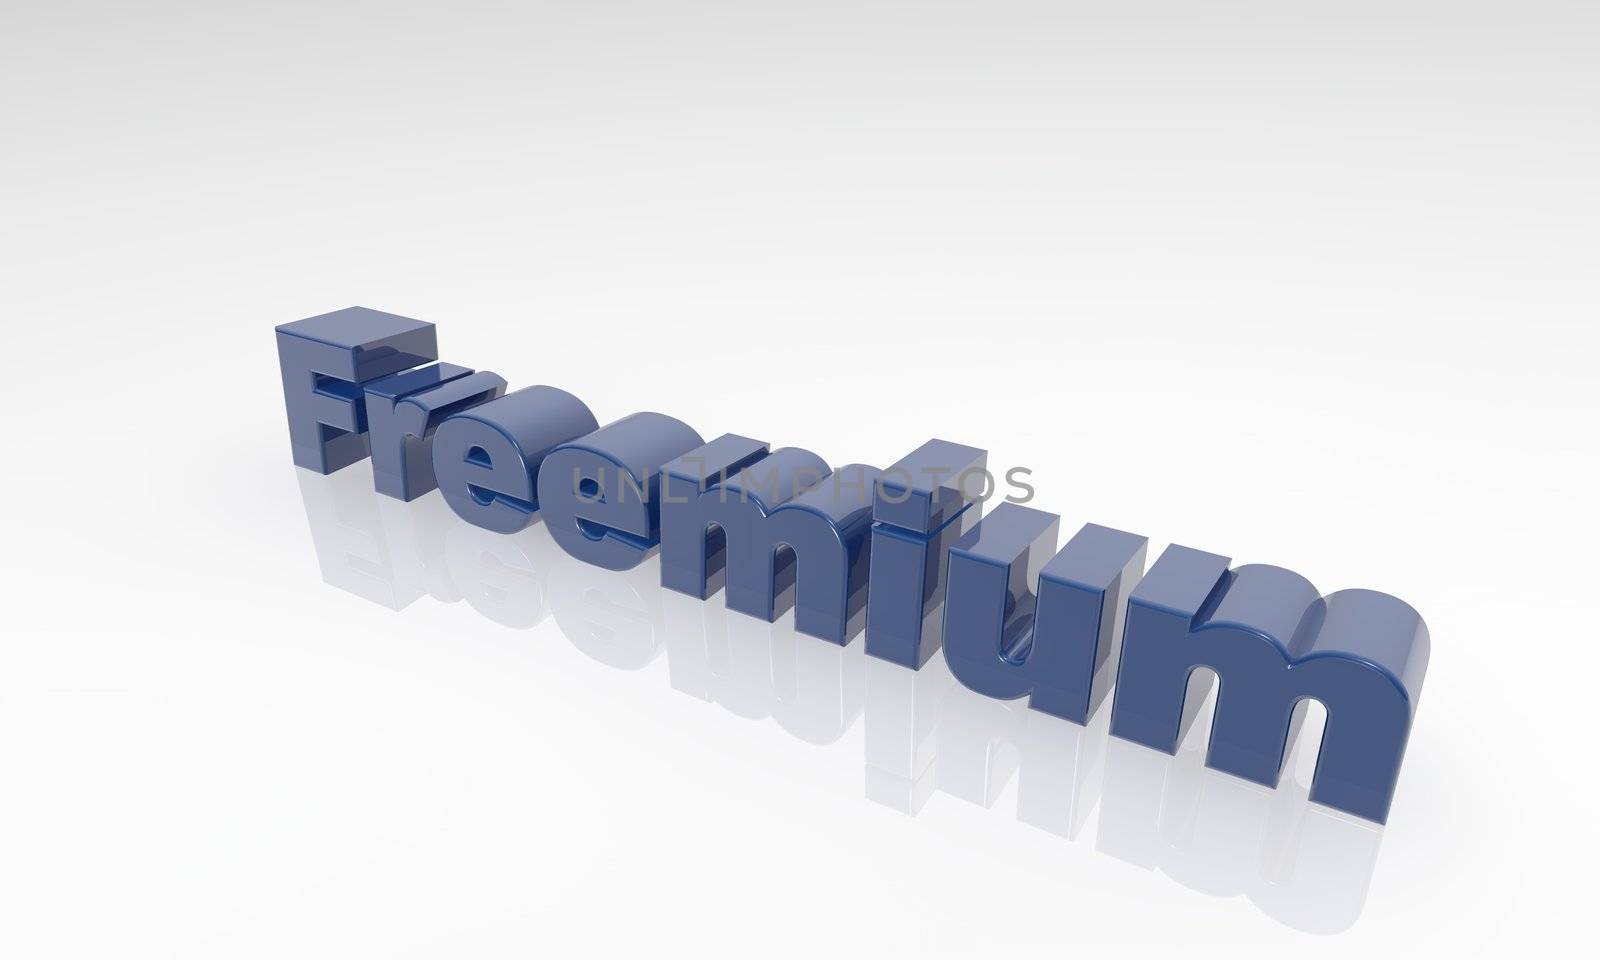 high quality three dimensional text. Great for business presentations and print materials.